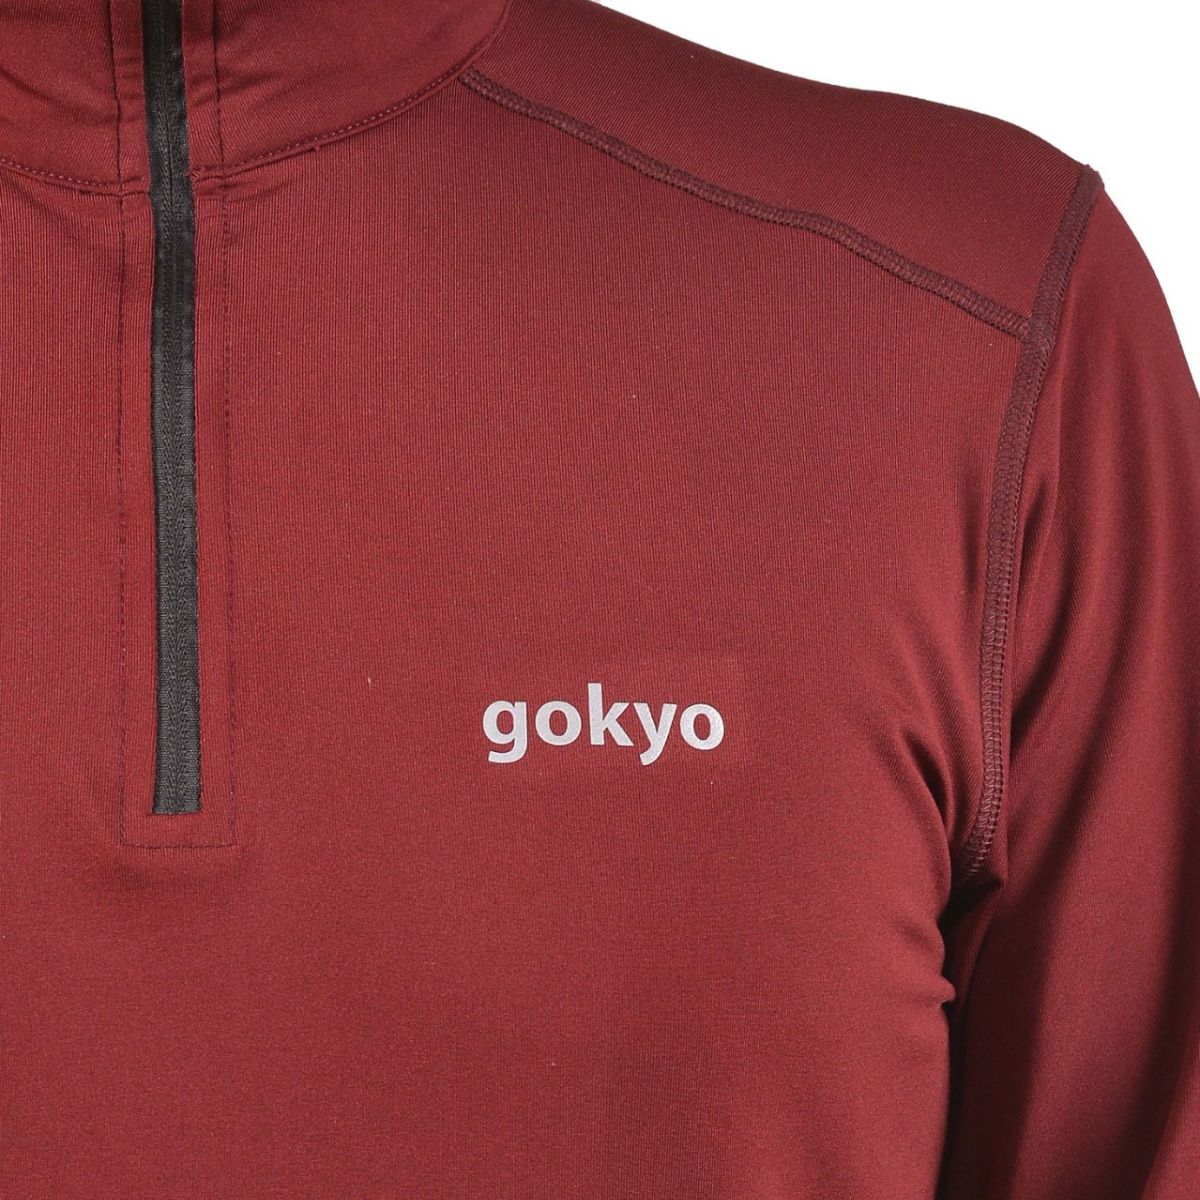 Gokyo High Altitude T-Shirt for Cold Weather Treks - Sherpa Series - 7